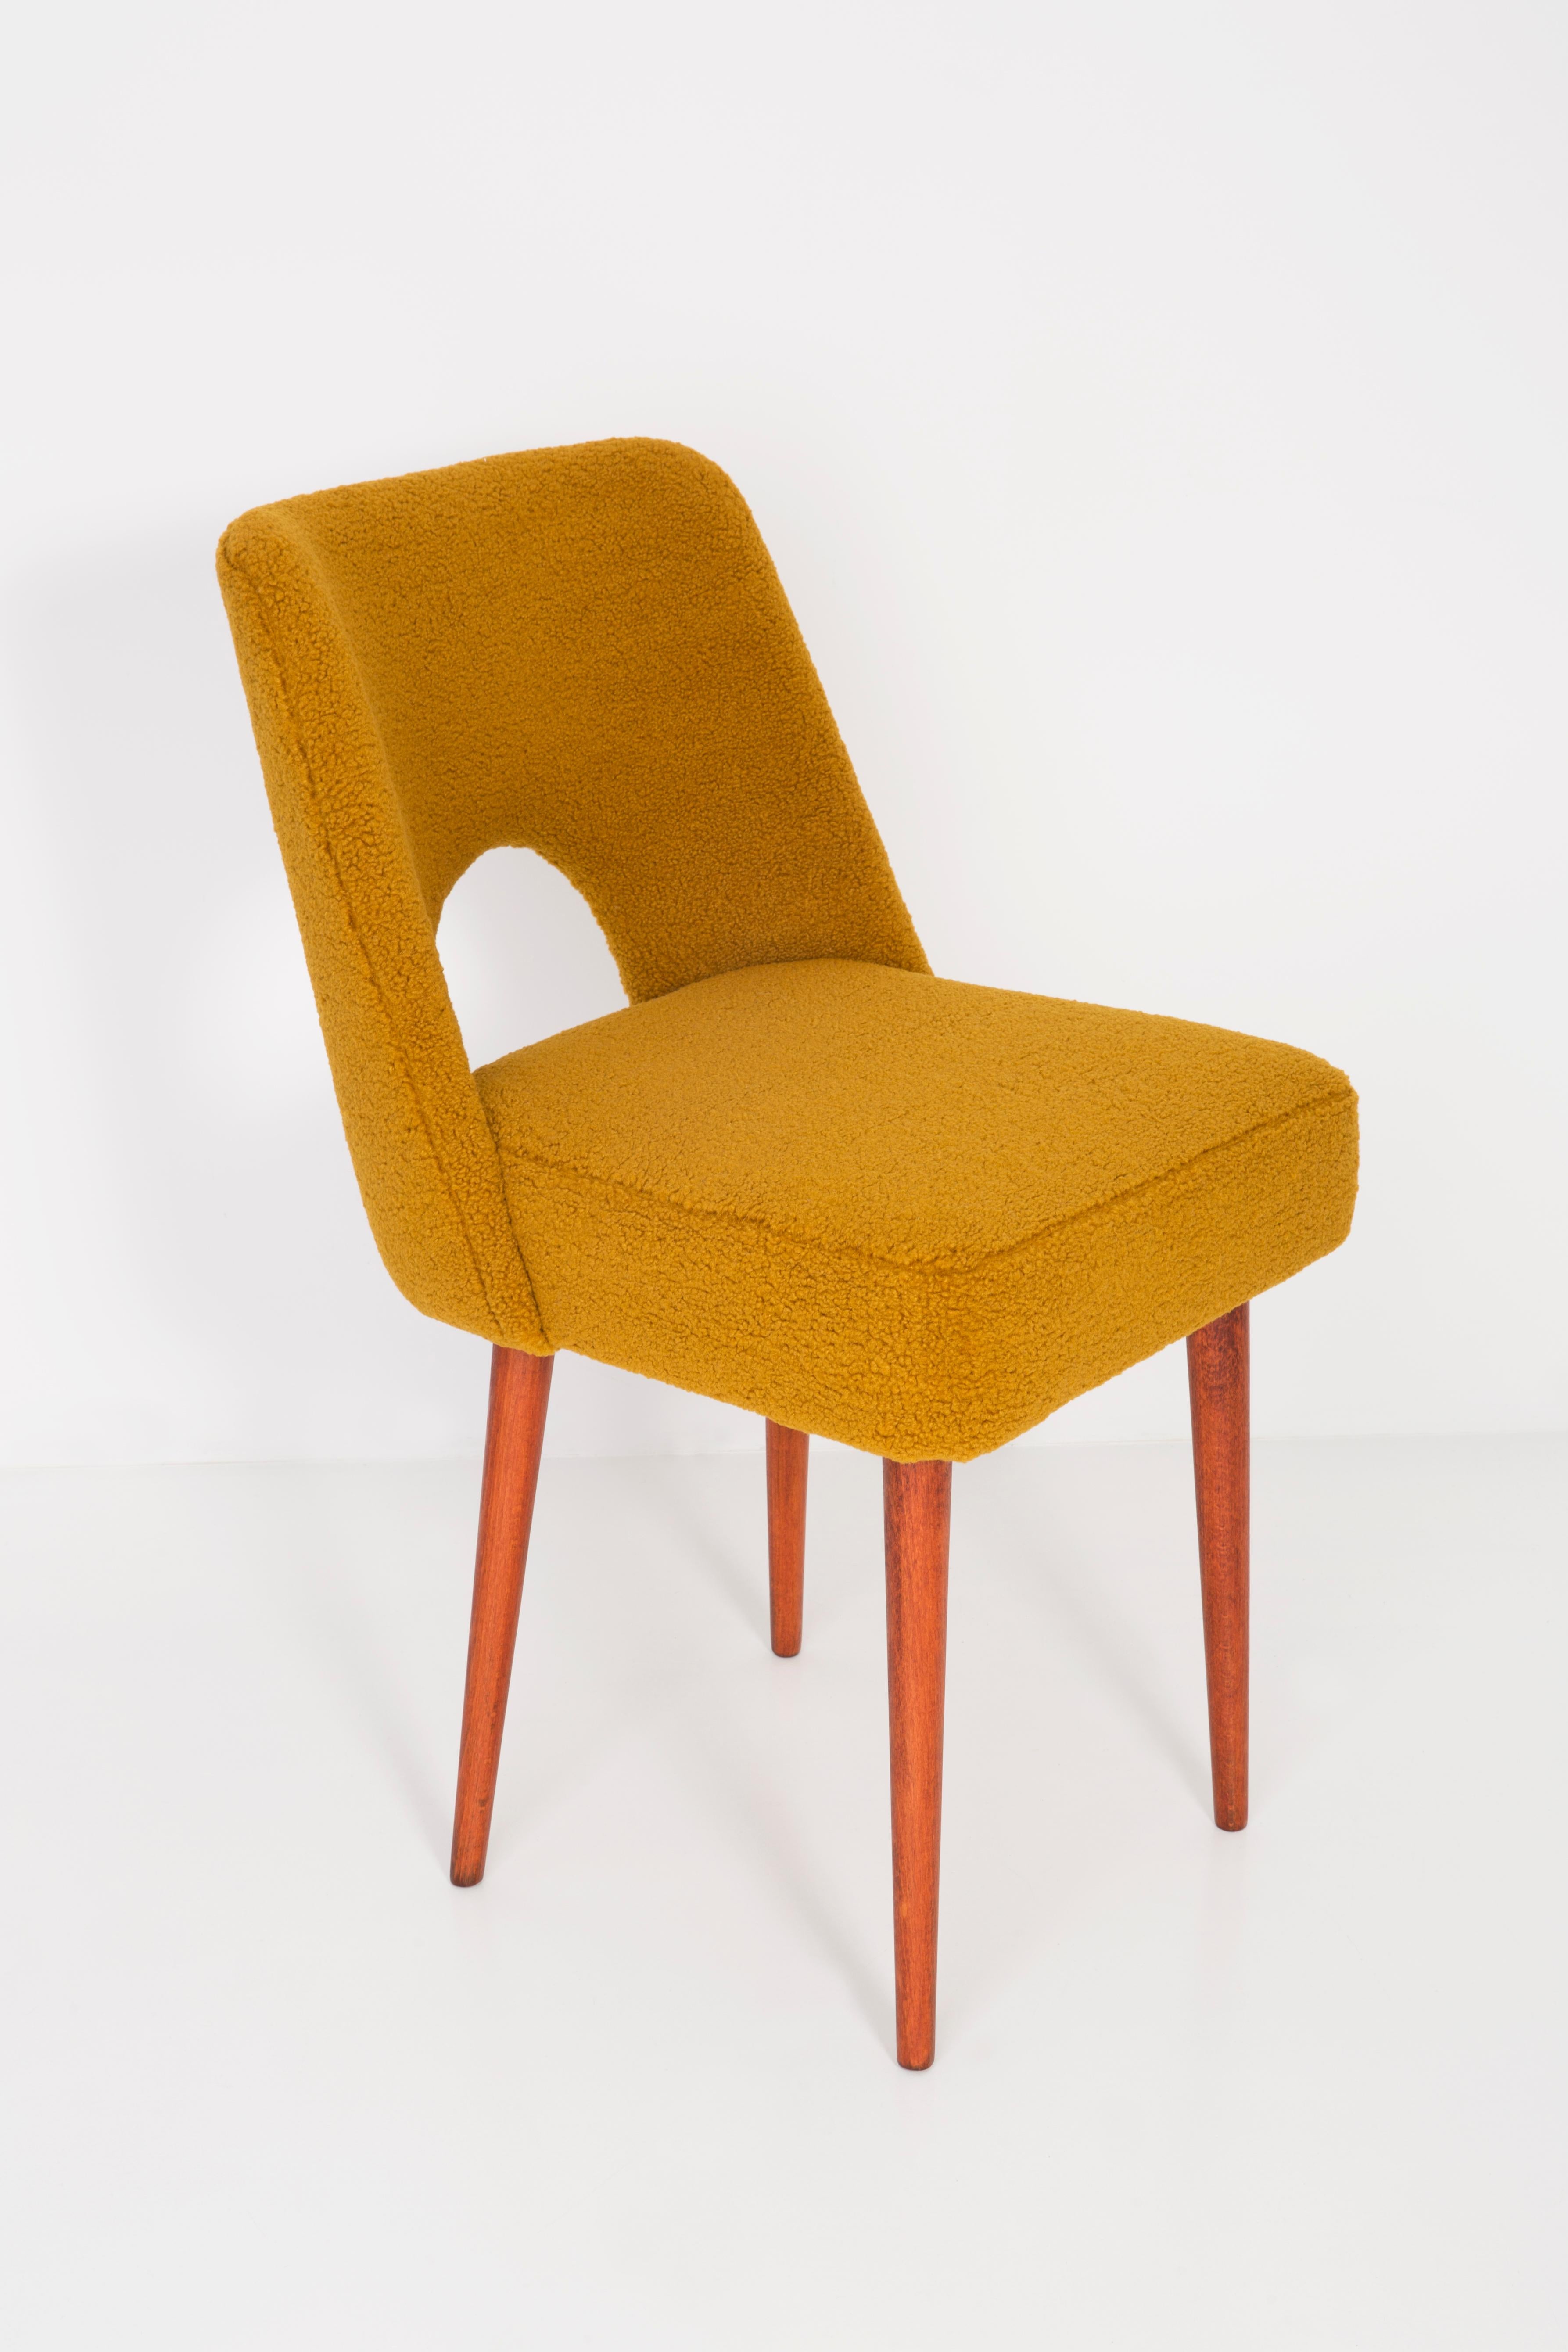 Set of Two Yellow Ochre Boucle 'Shell' Chairs, 1960s For Sale 1